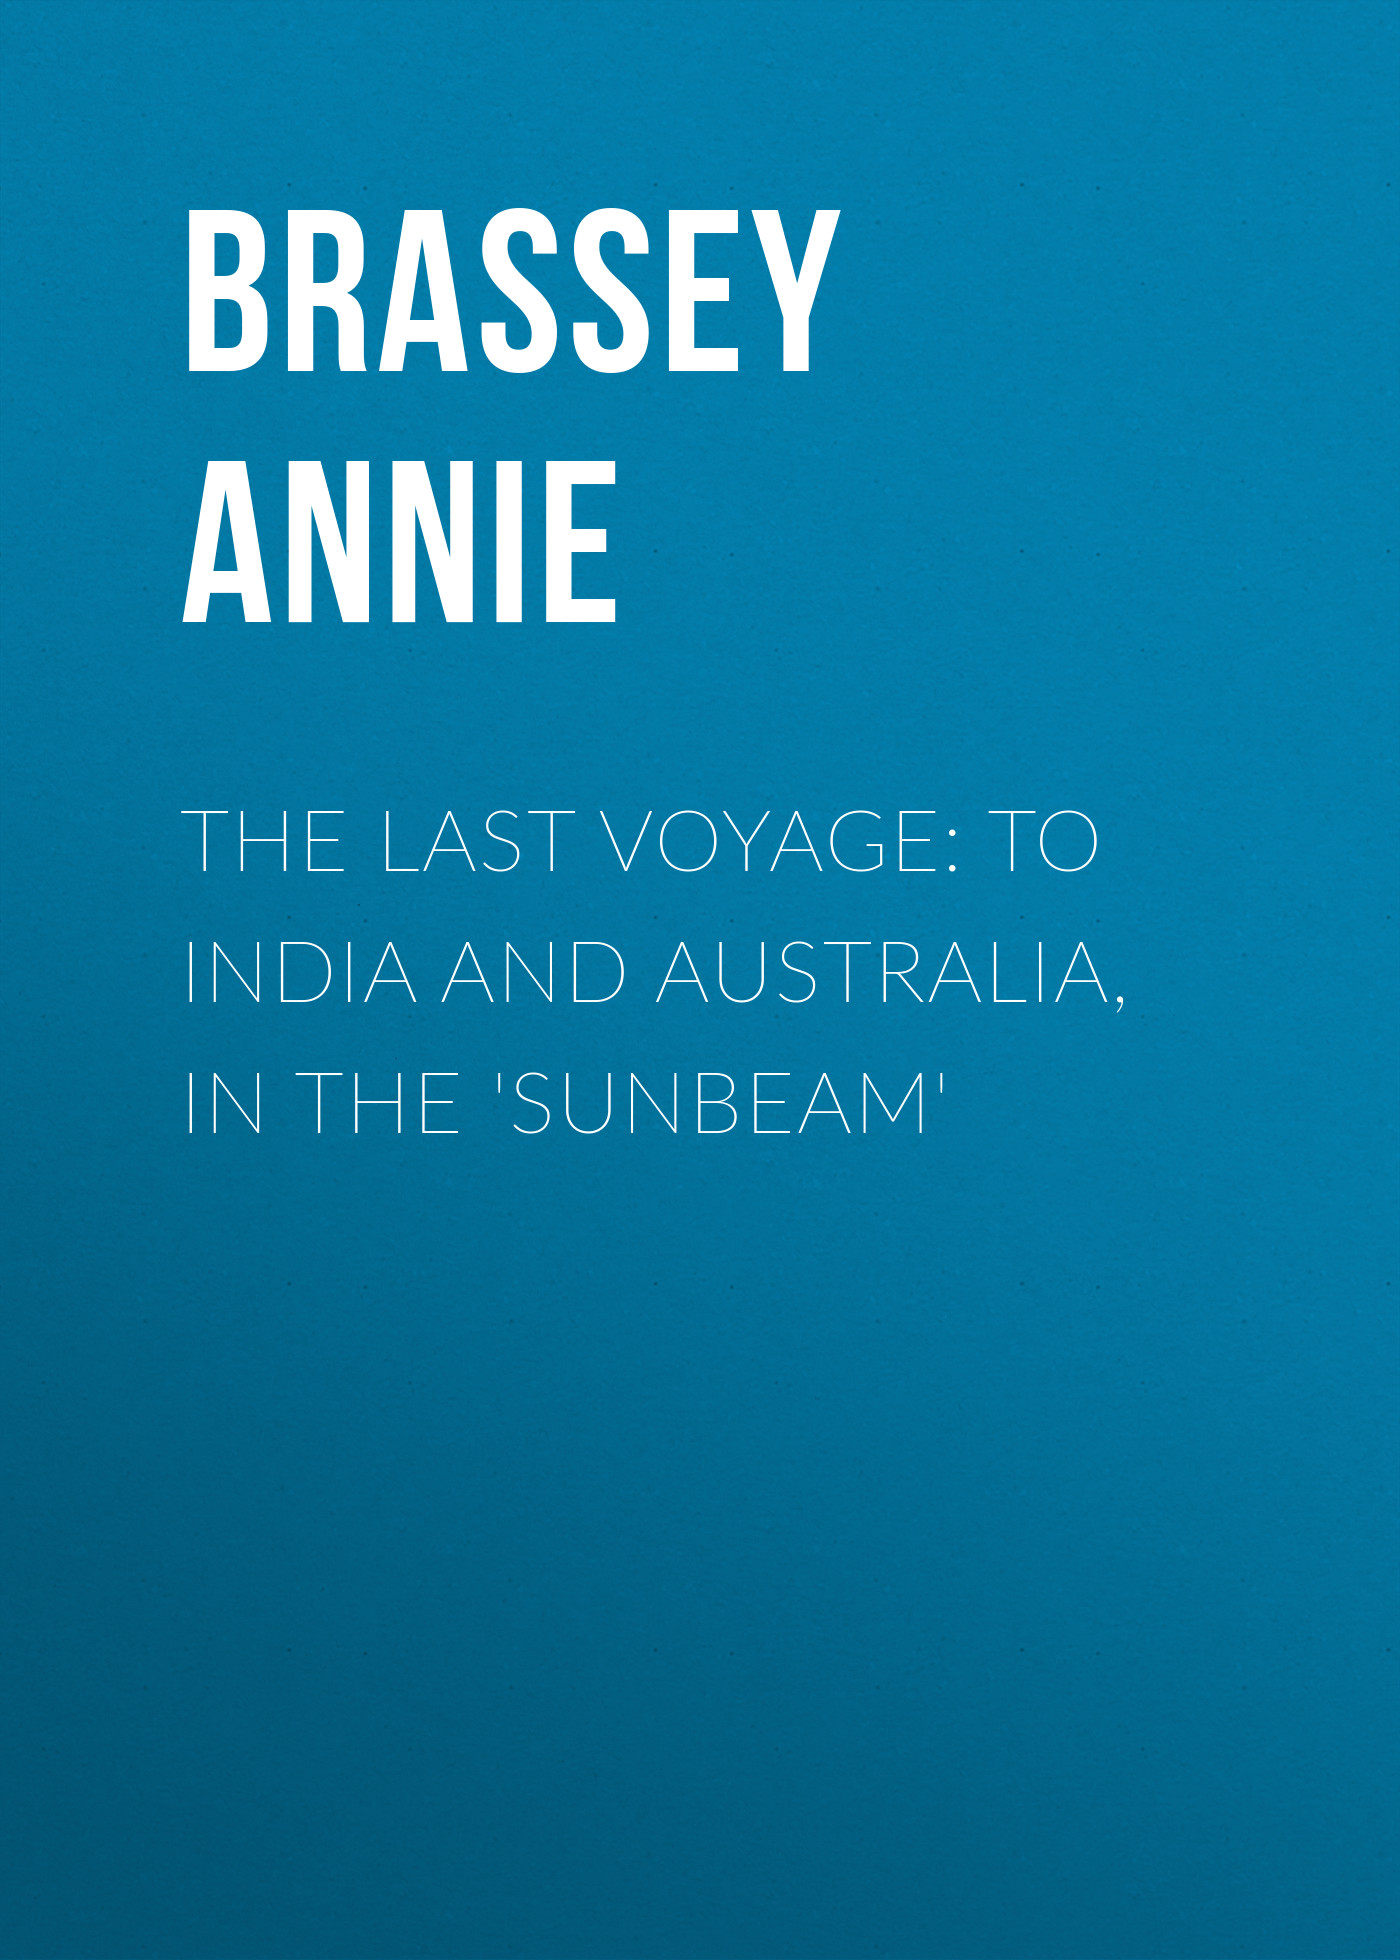 Brassey Annie The Last Voyage: To India and Australia, in the 'Sunbeam'